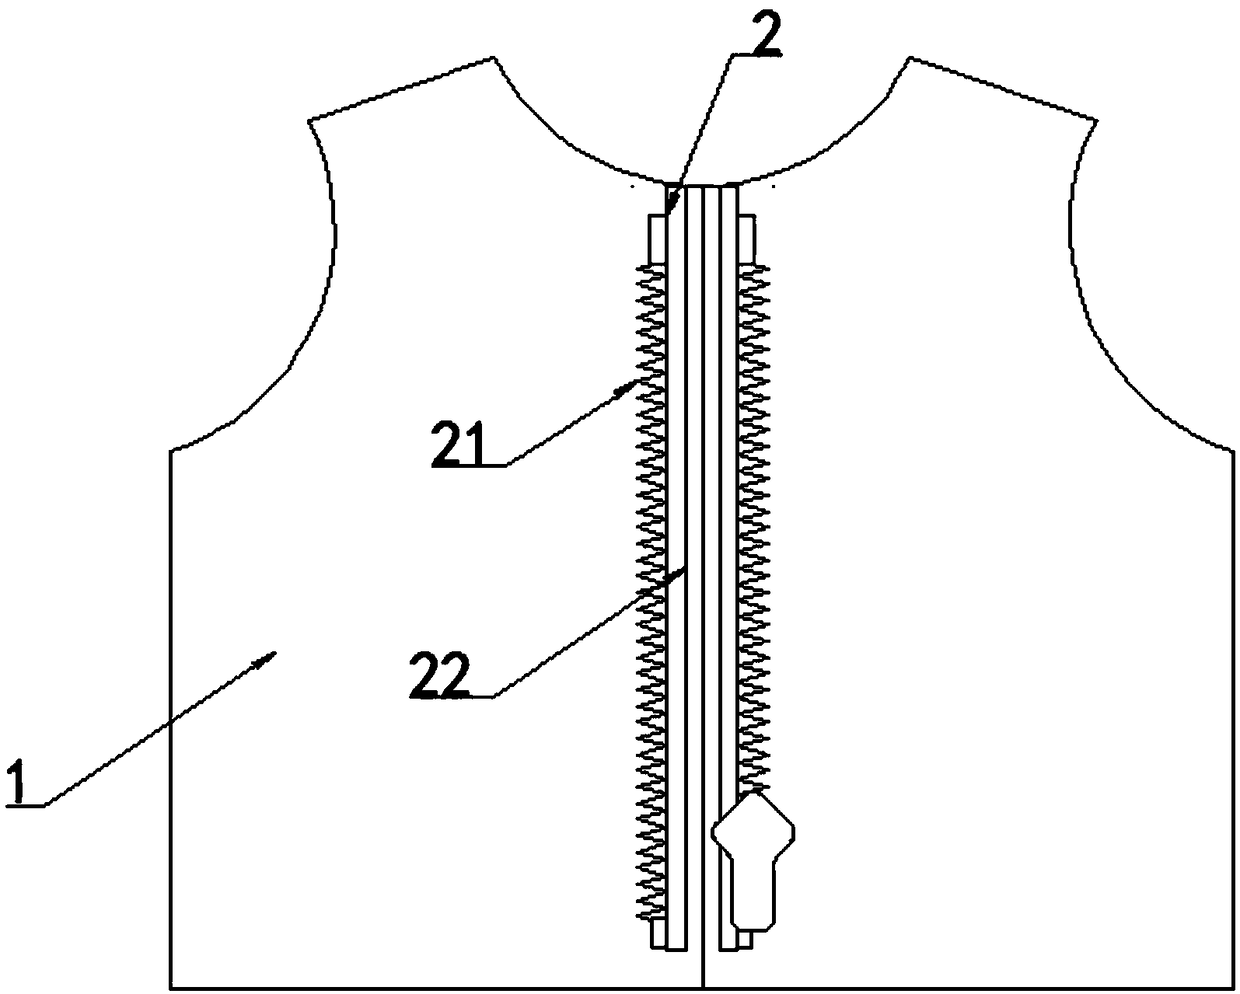 Upper garment top fly manufacturing method